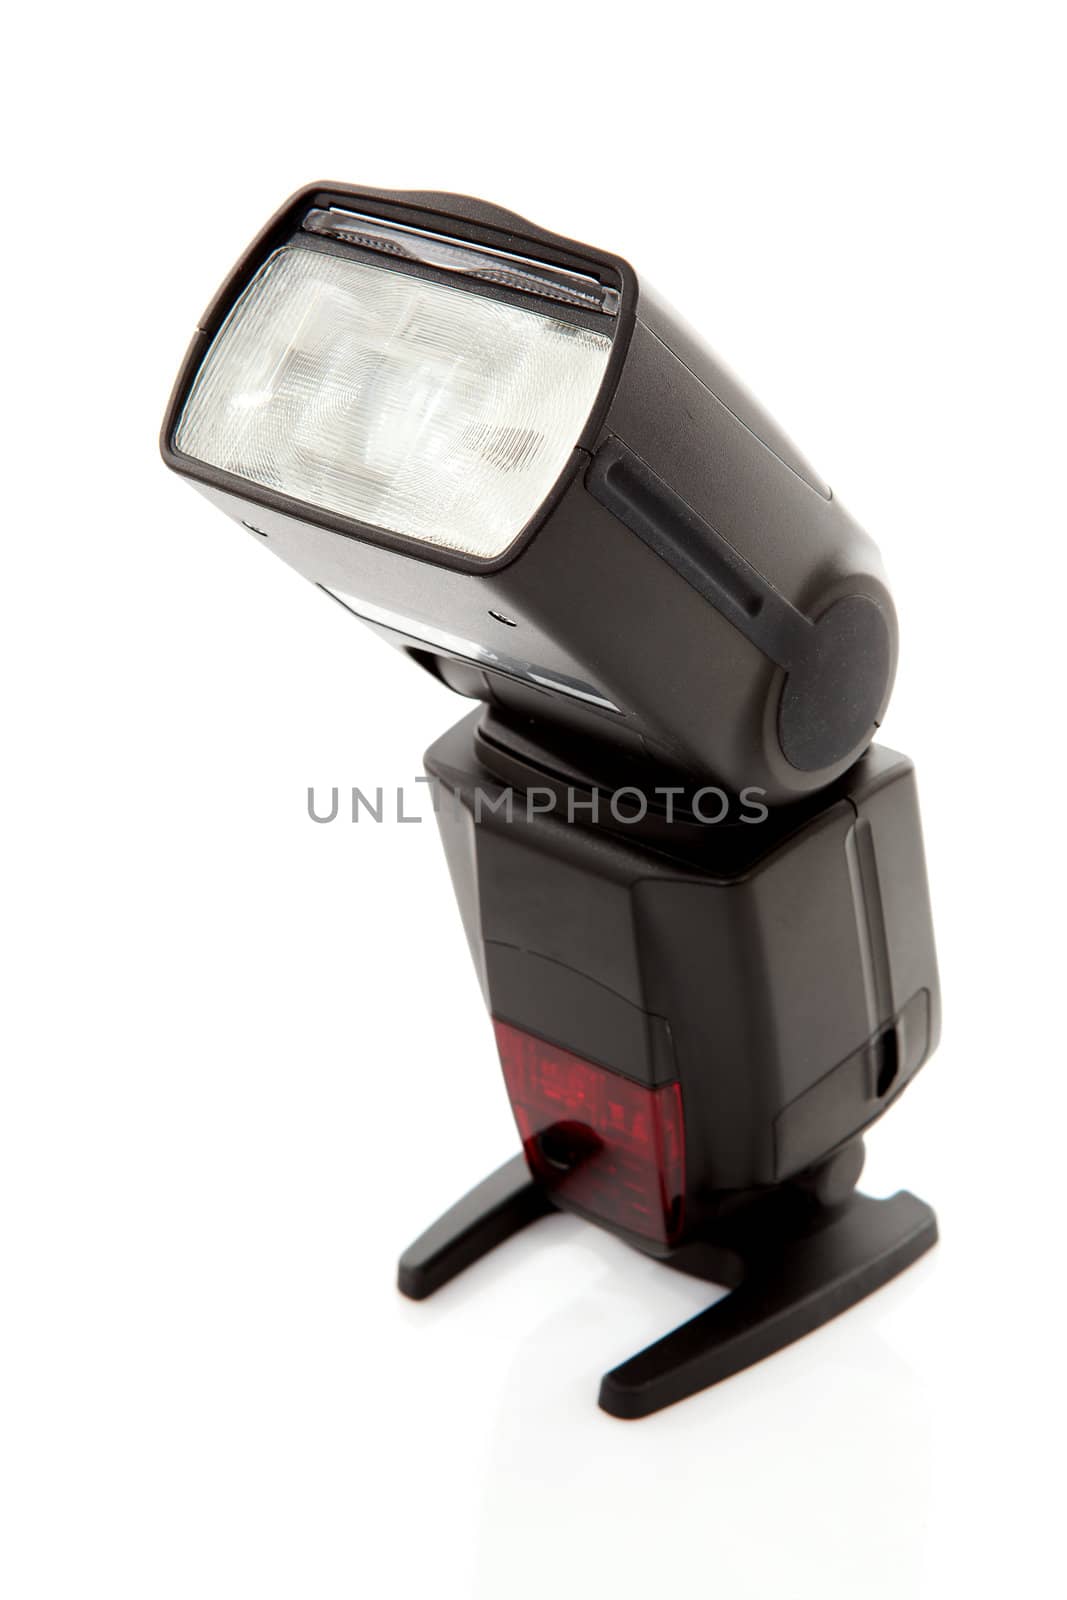 external remote flash over white background